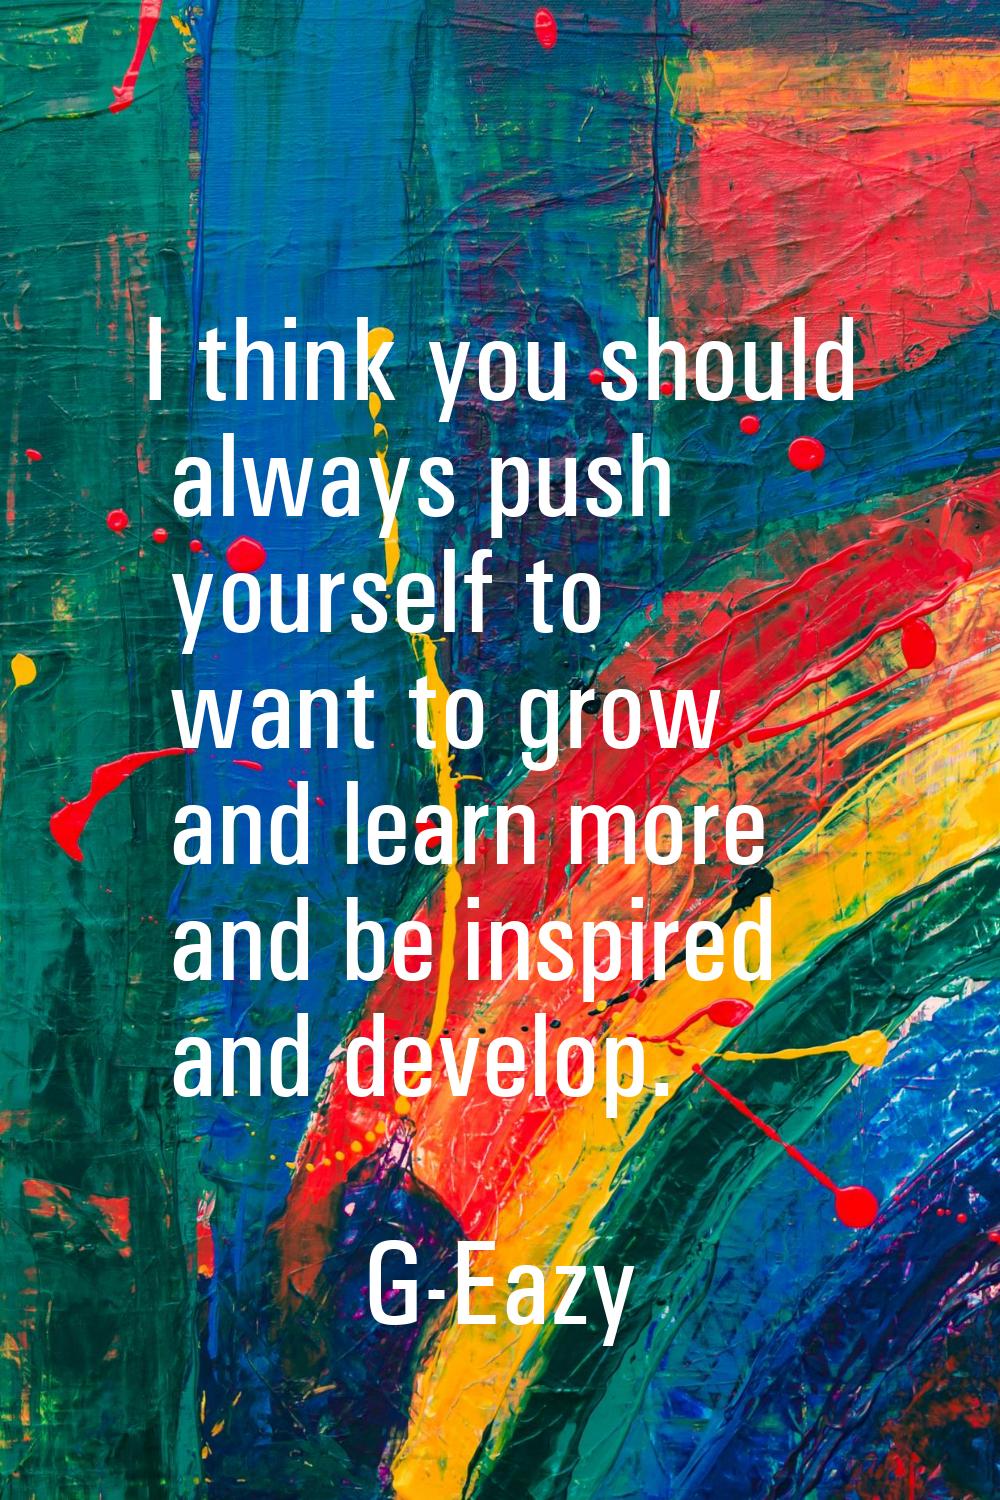 I think you should always push yourself to want to grow and learn more and be inspired and develop.